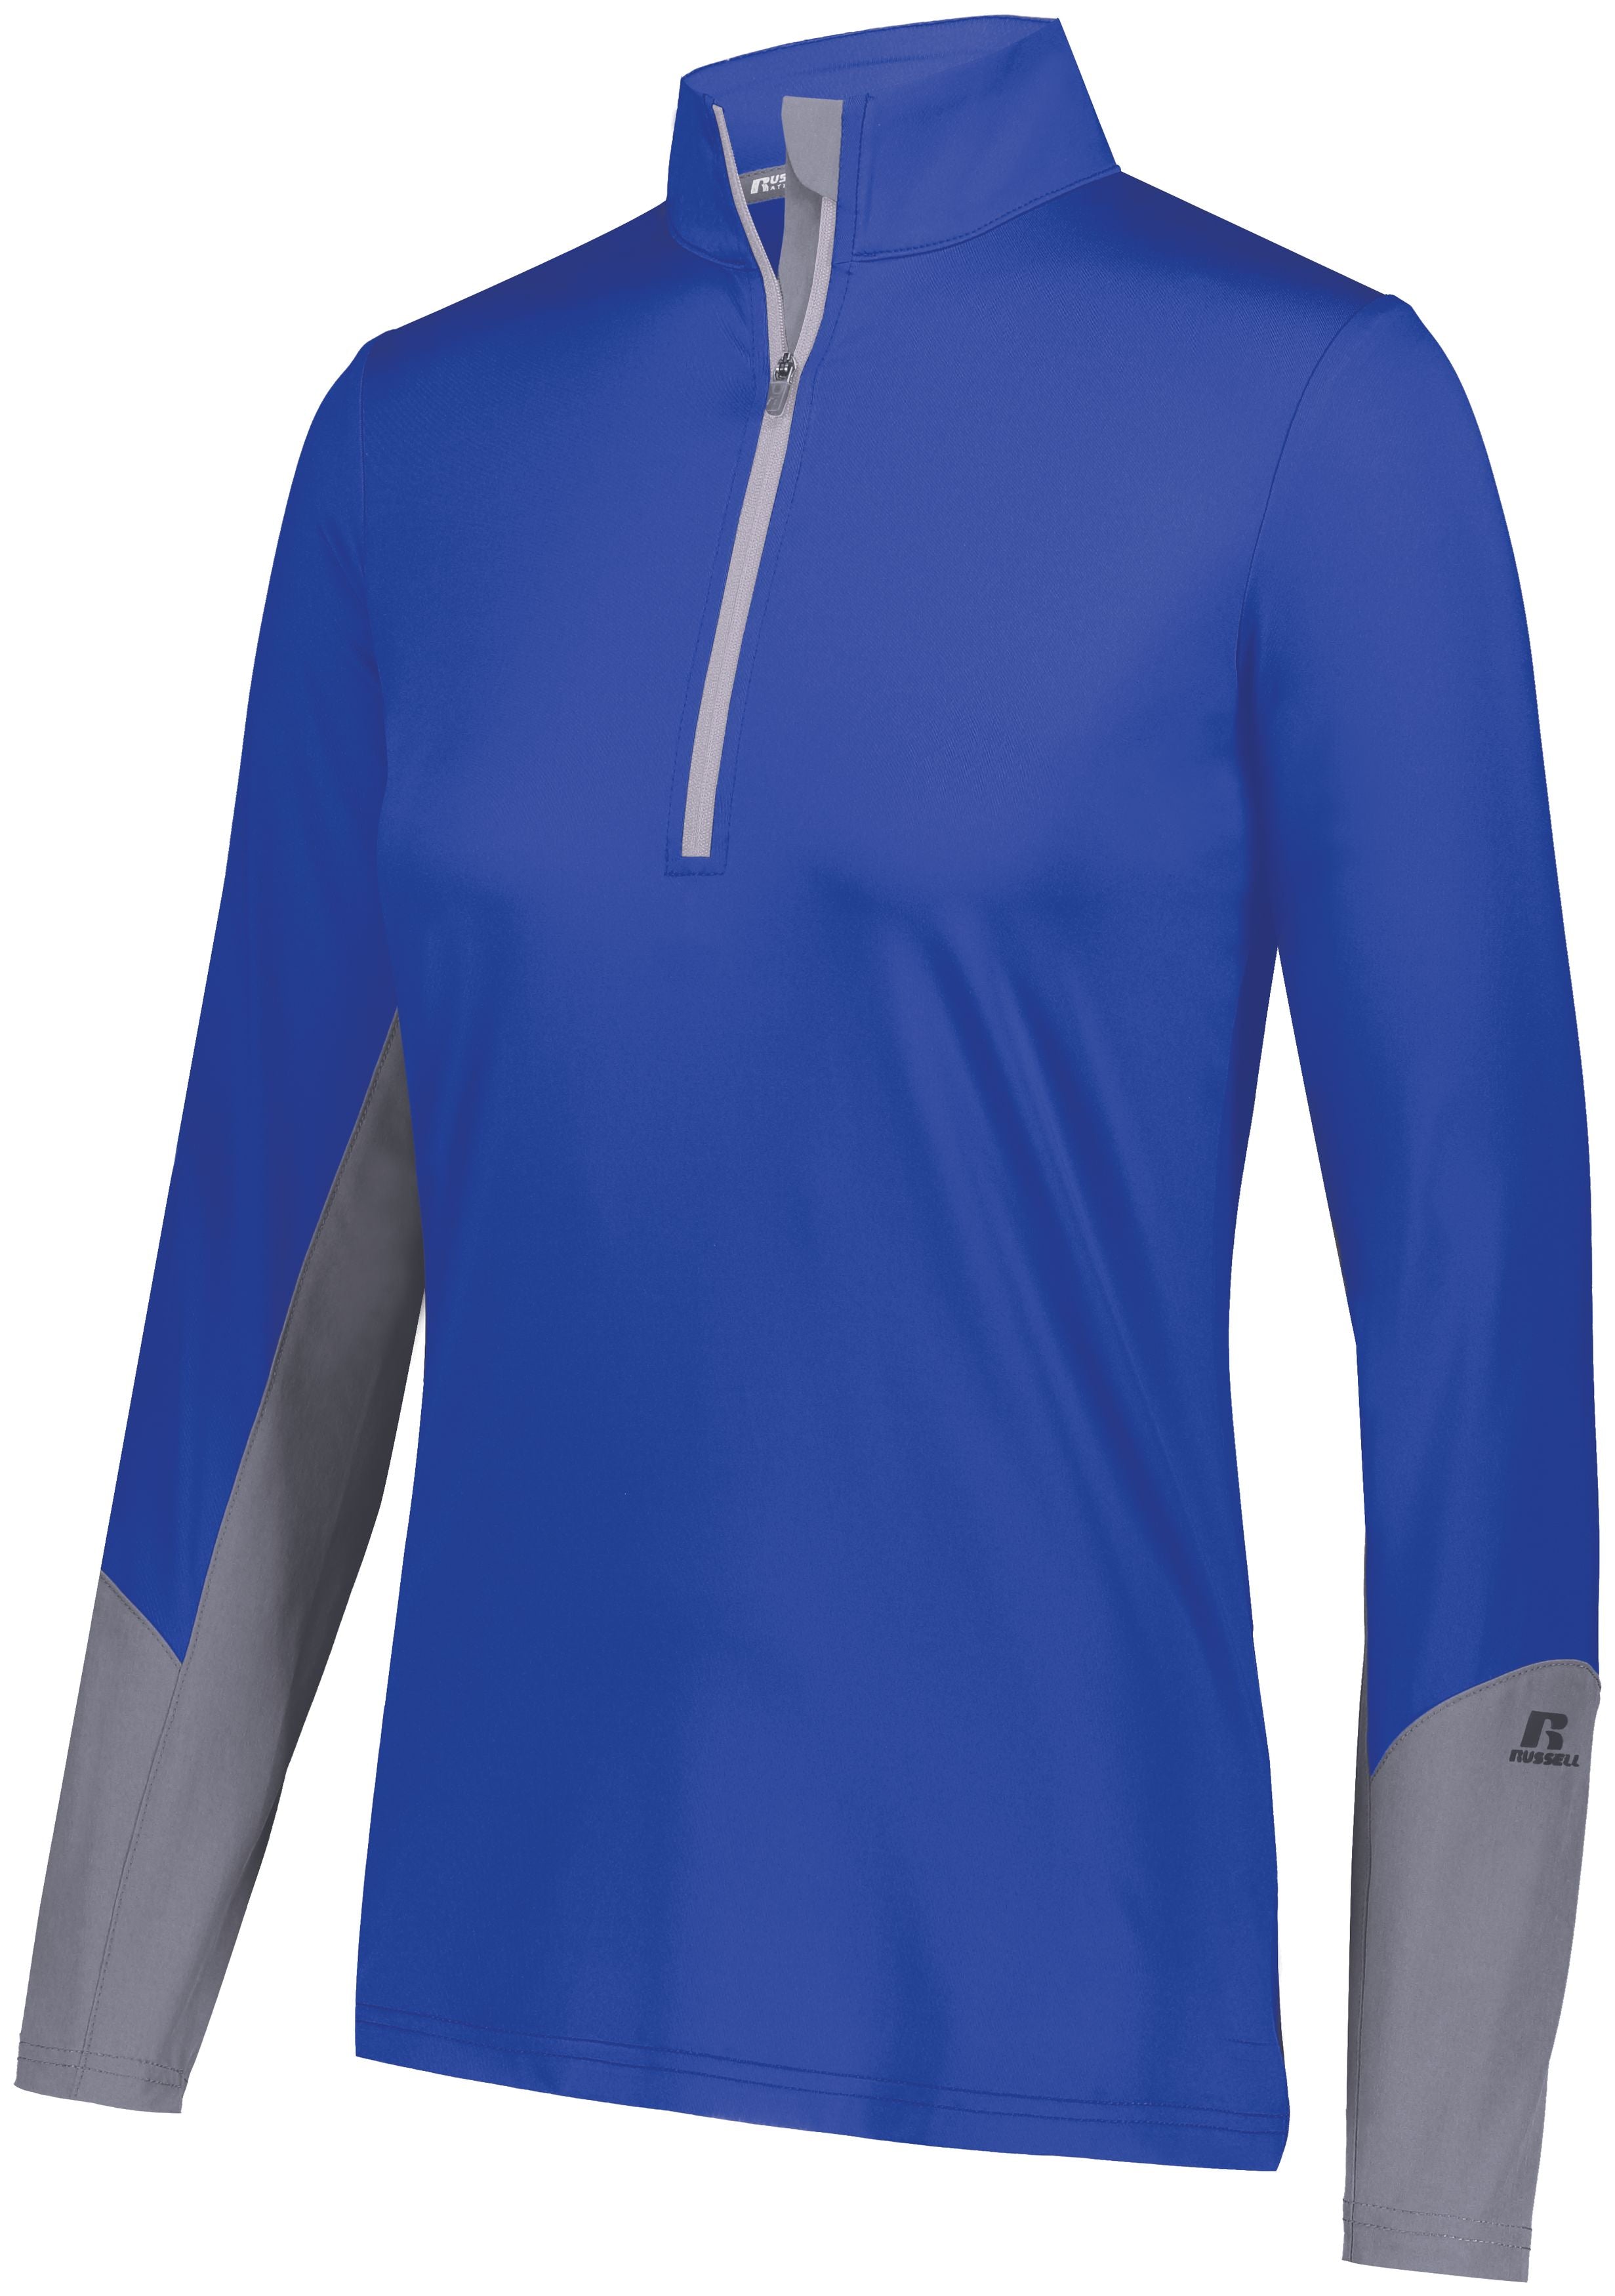 Russell Athletic Ladies Hybrid Pullover in Royal/Steel  -Part of the Ladies, Russell-Athletic-Products, Shirts product lines at KanaleyCreations.com